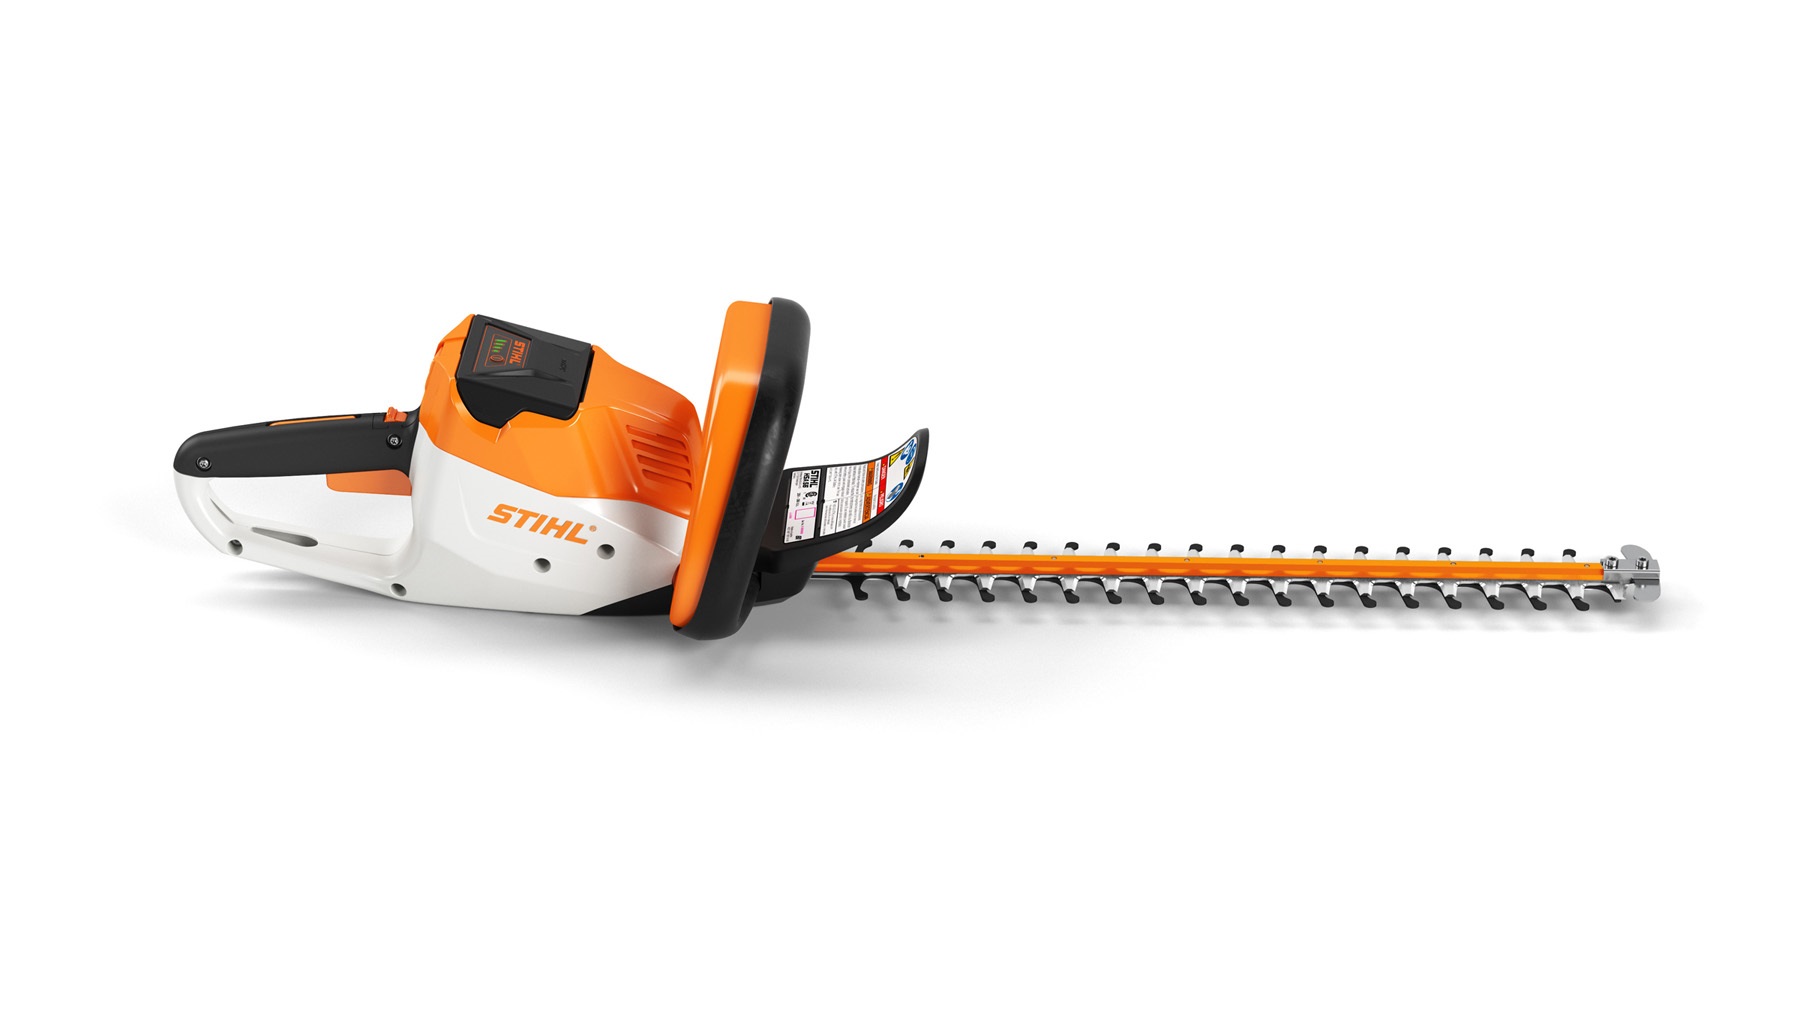 hedge trimmer battery